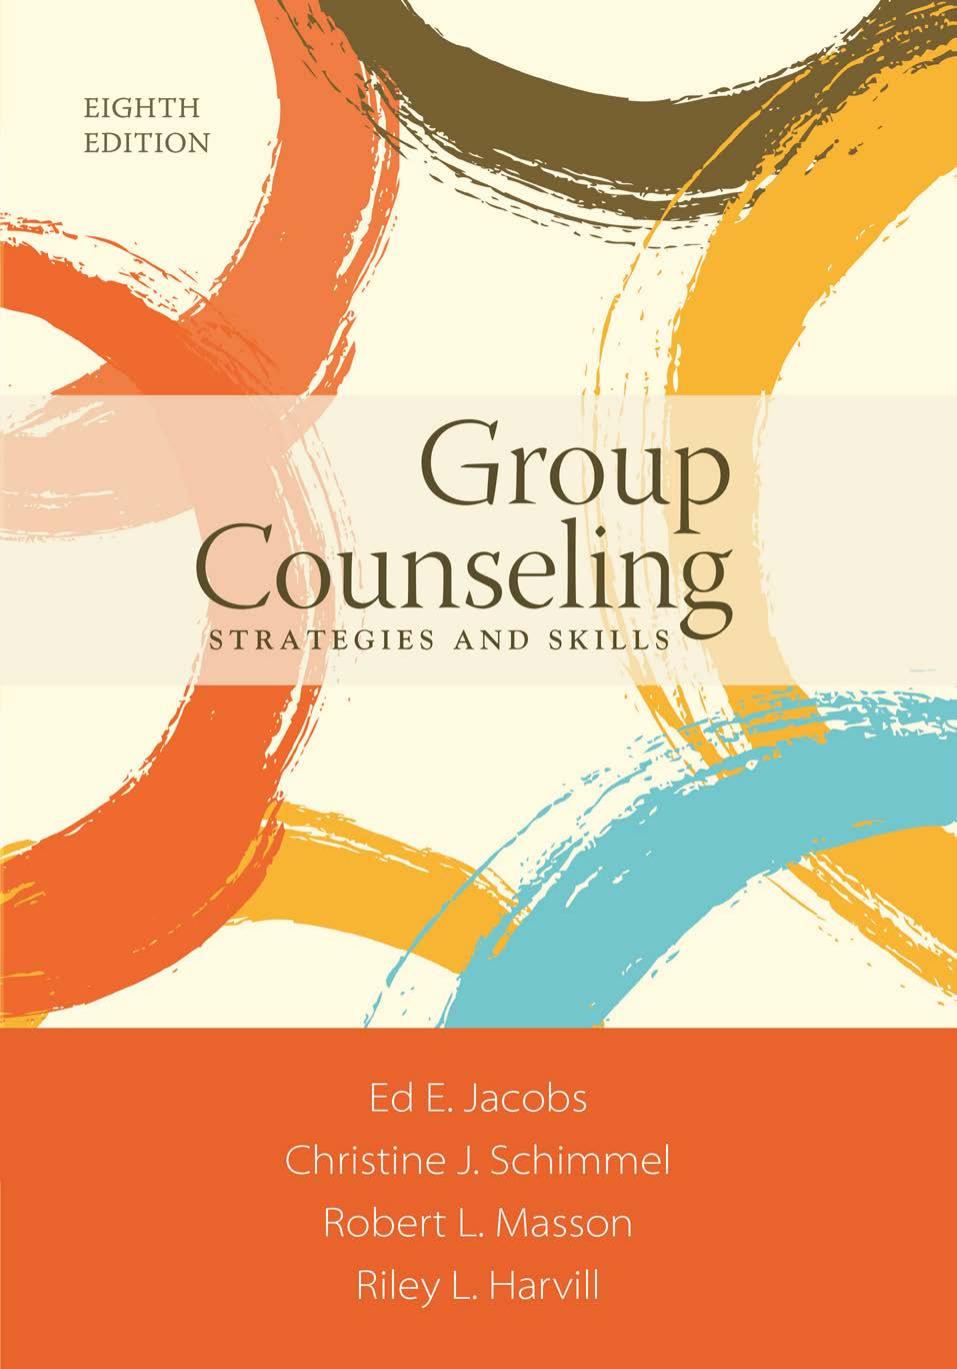 (eBook PDF)Group Counseling: Strategies and Skills 8th Edition by Ed E. Jacobs,Christine J. Schimmel